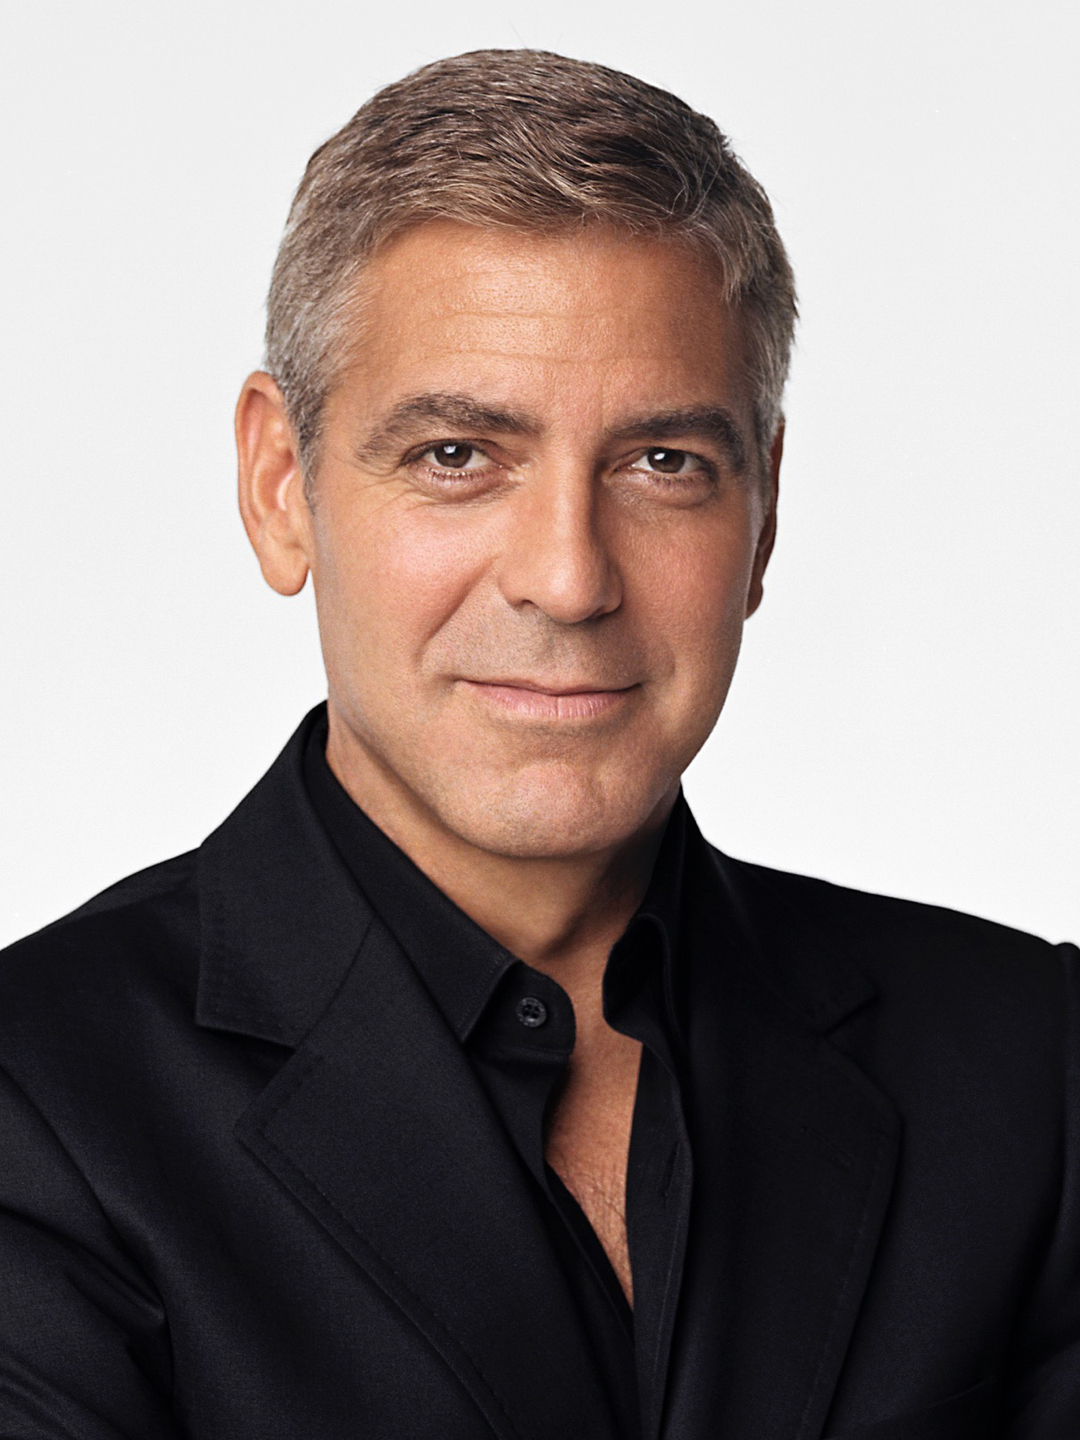 George Clooney dating history